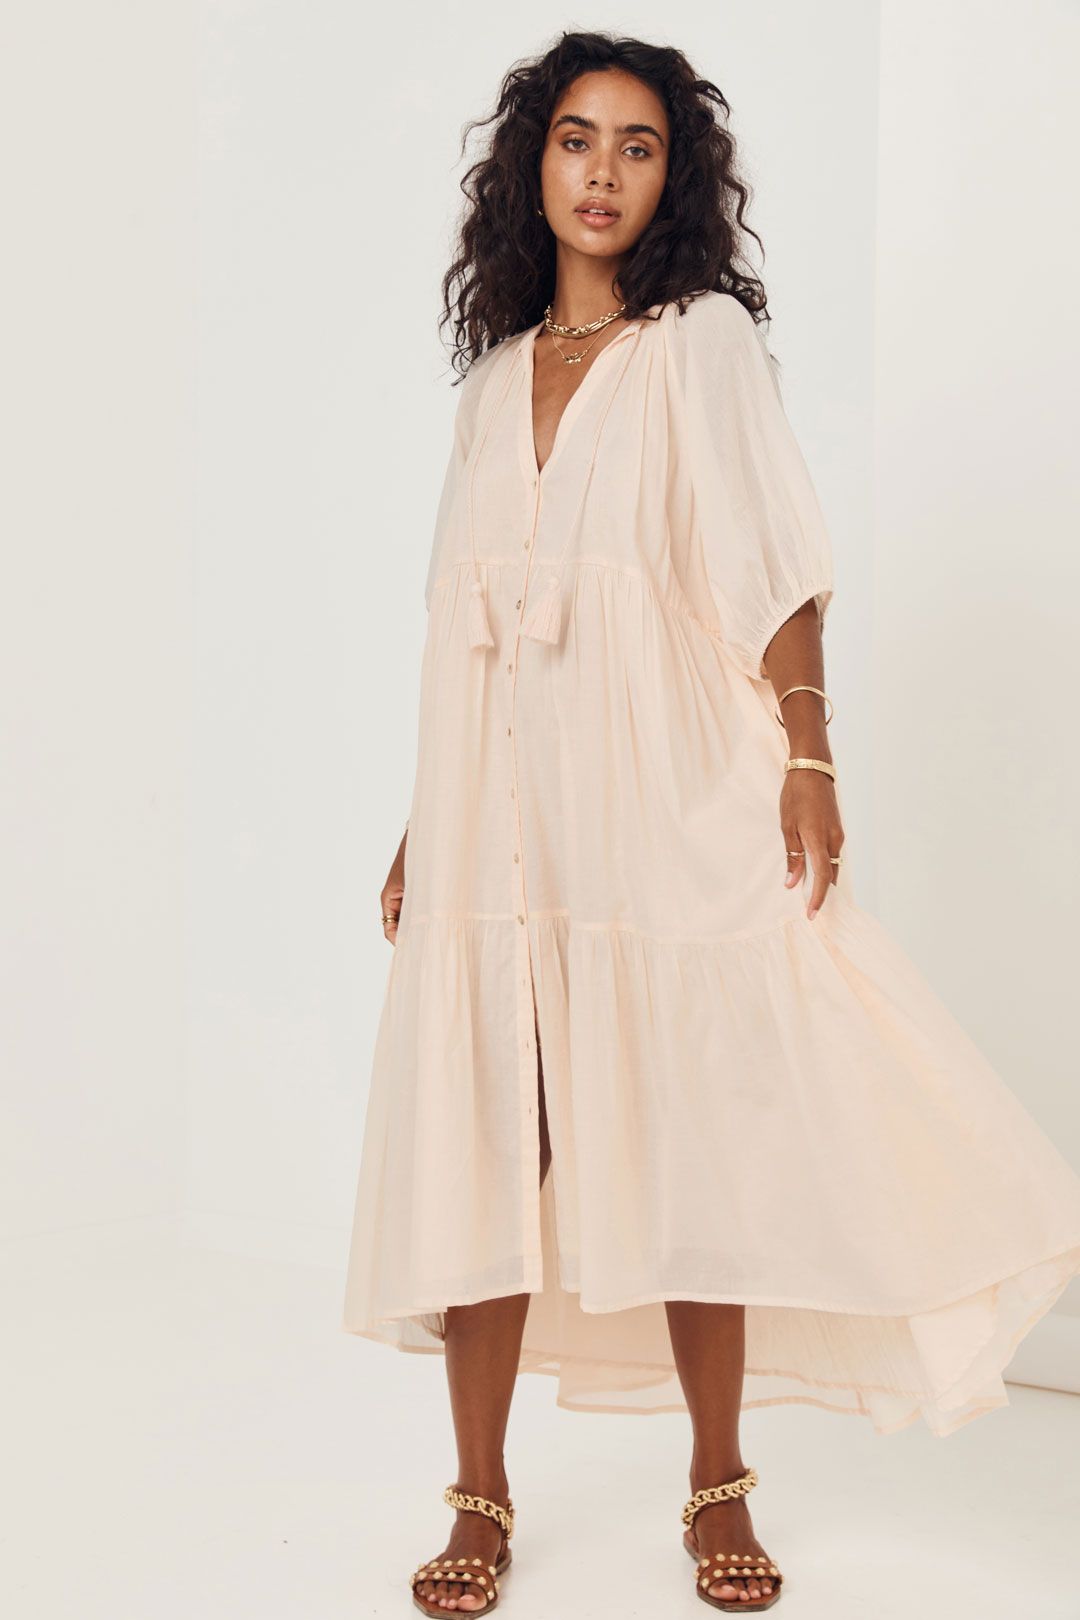 Spell Honey Smock Dress Peach Relaxed Fit